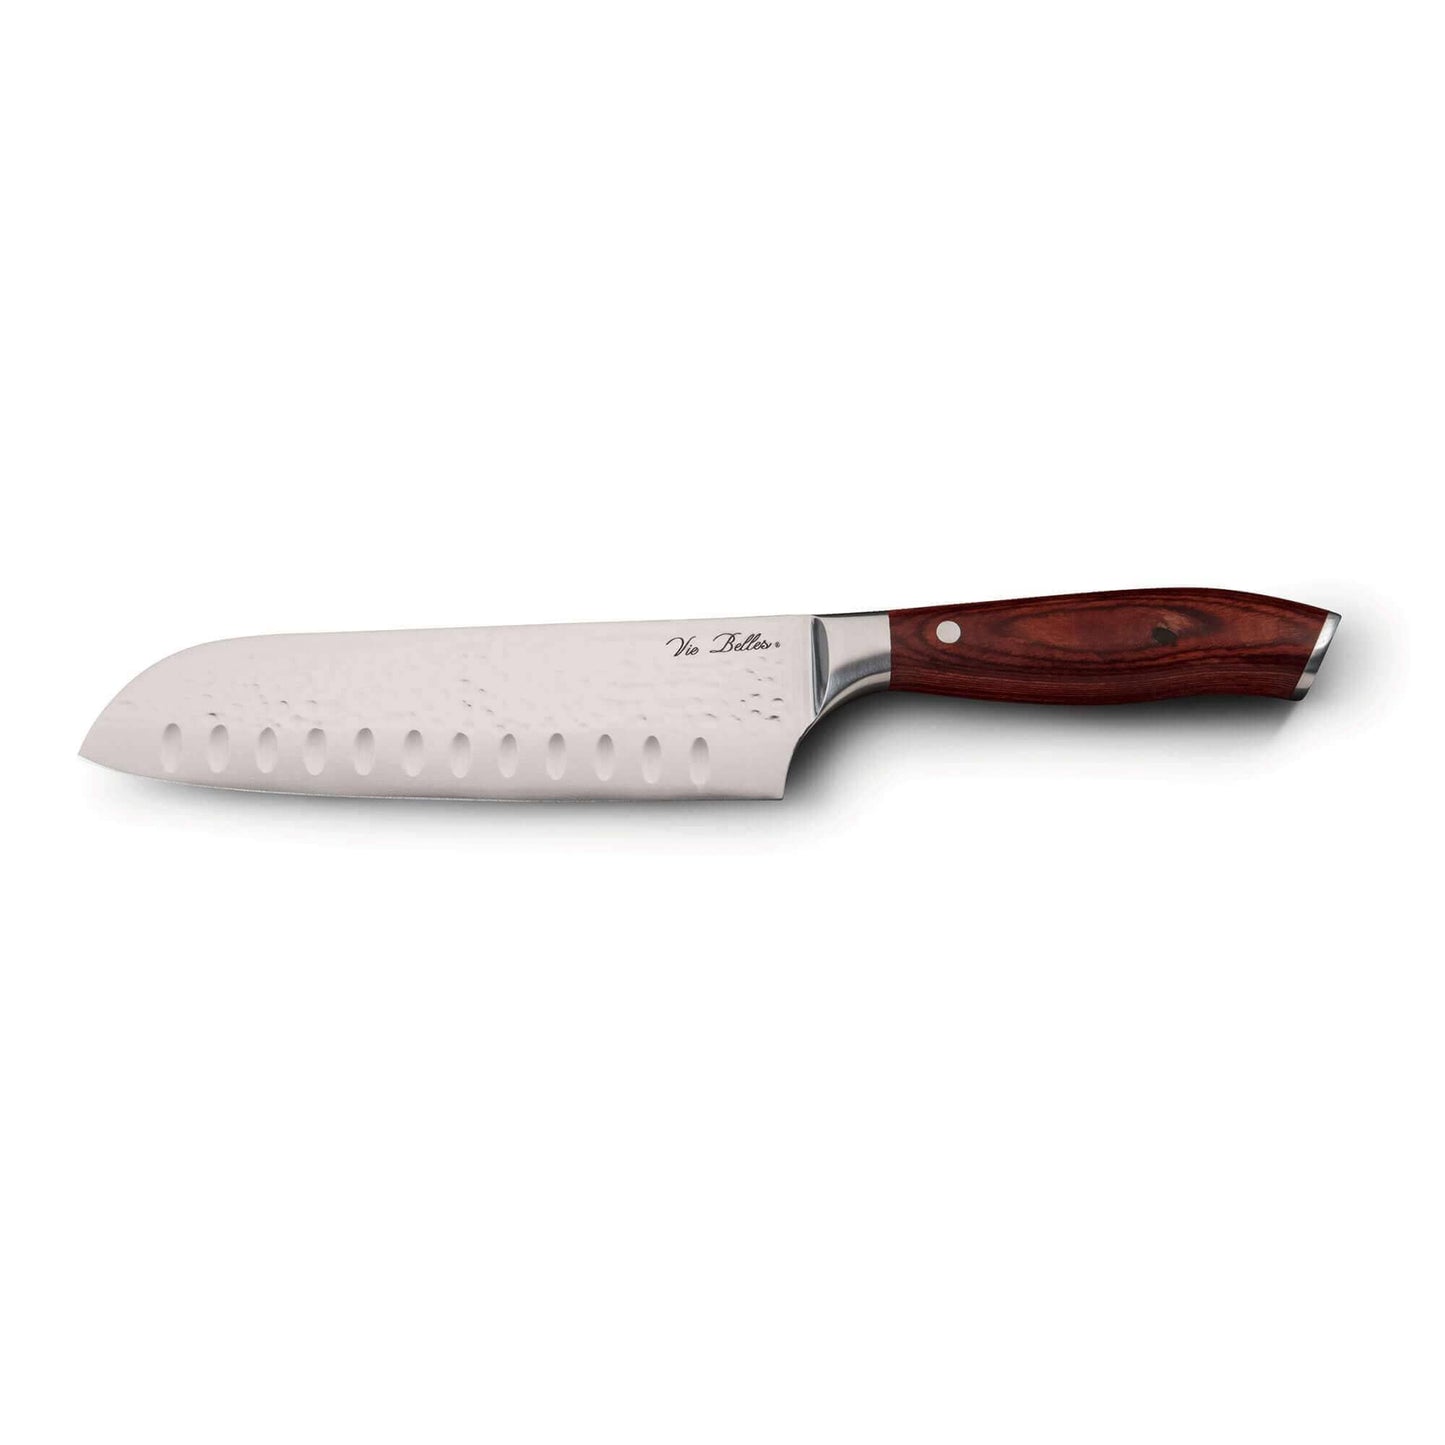 Santoku Knife for Home and Kitchen